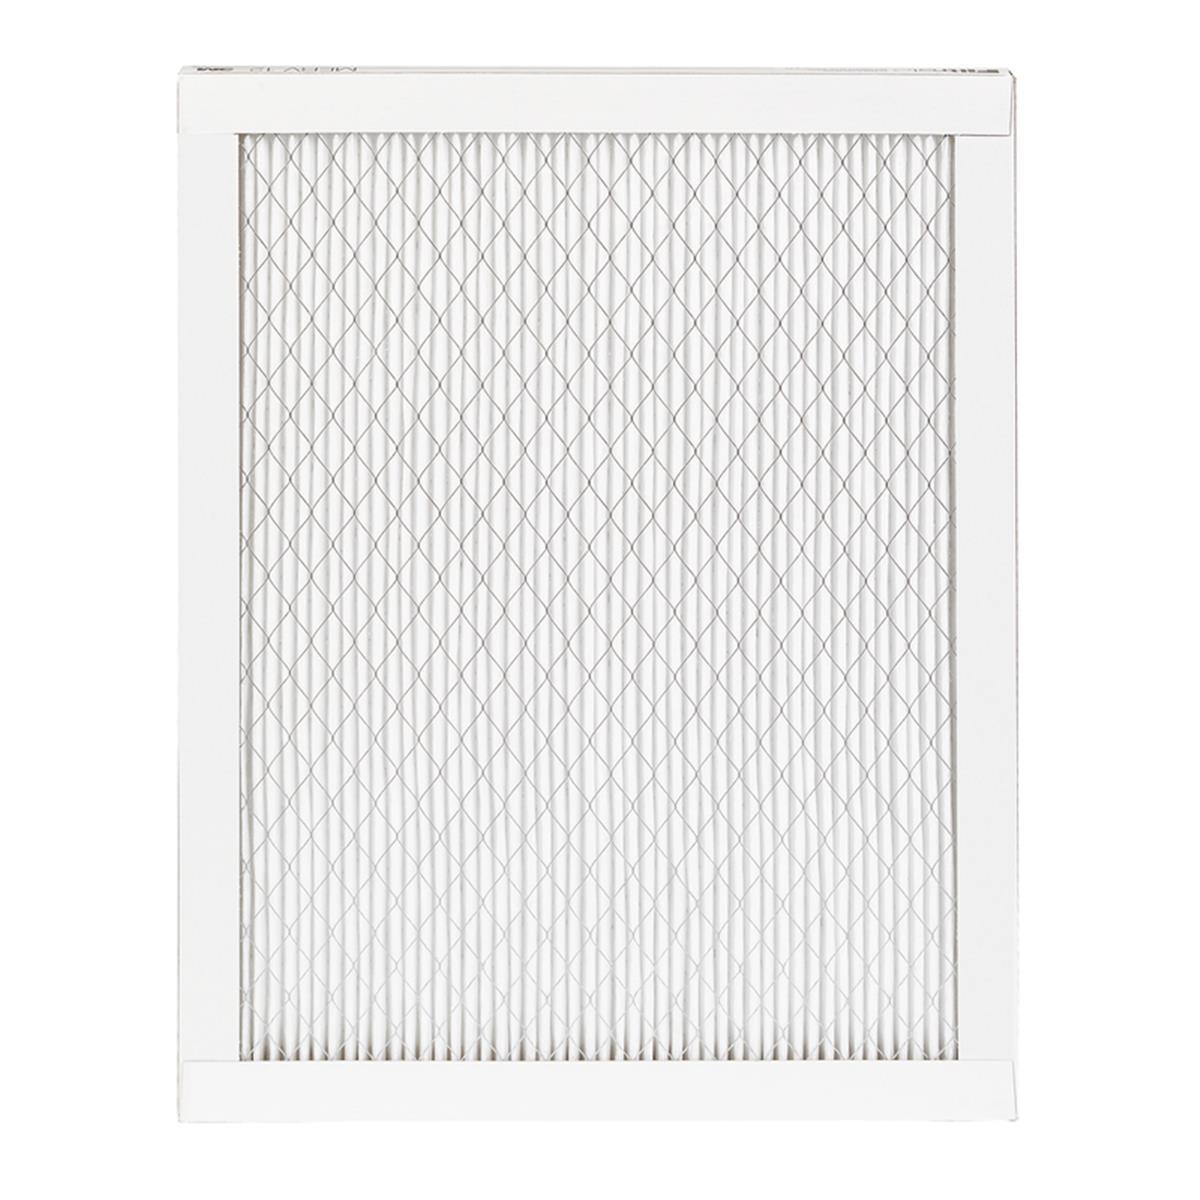 Picture of 3M 4199535 18 x 30 x 1 in. 1500 MPR Air Filter - pack of 4